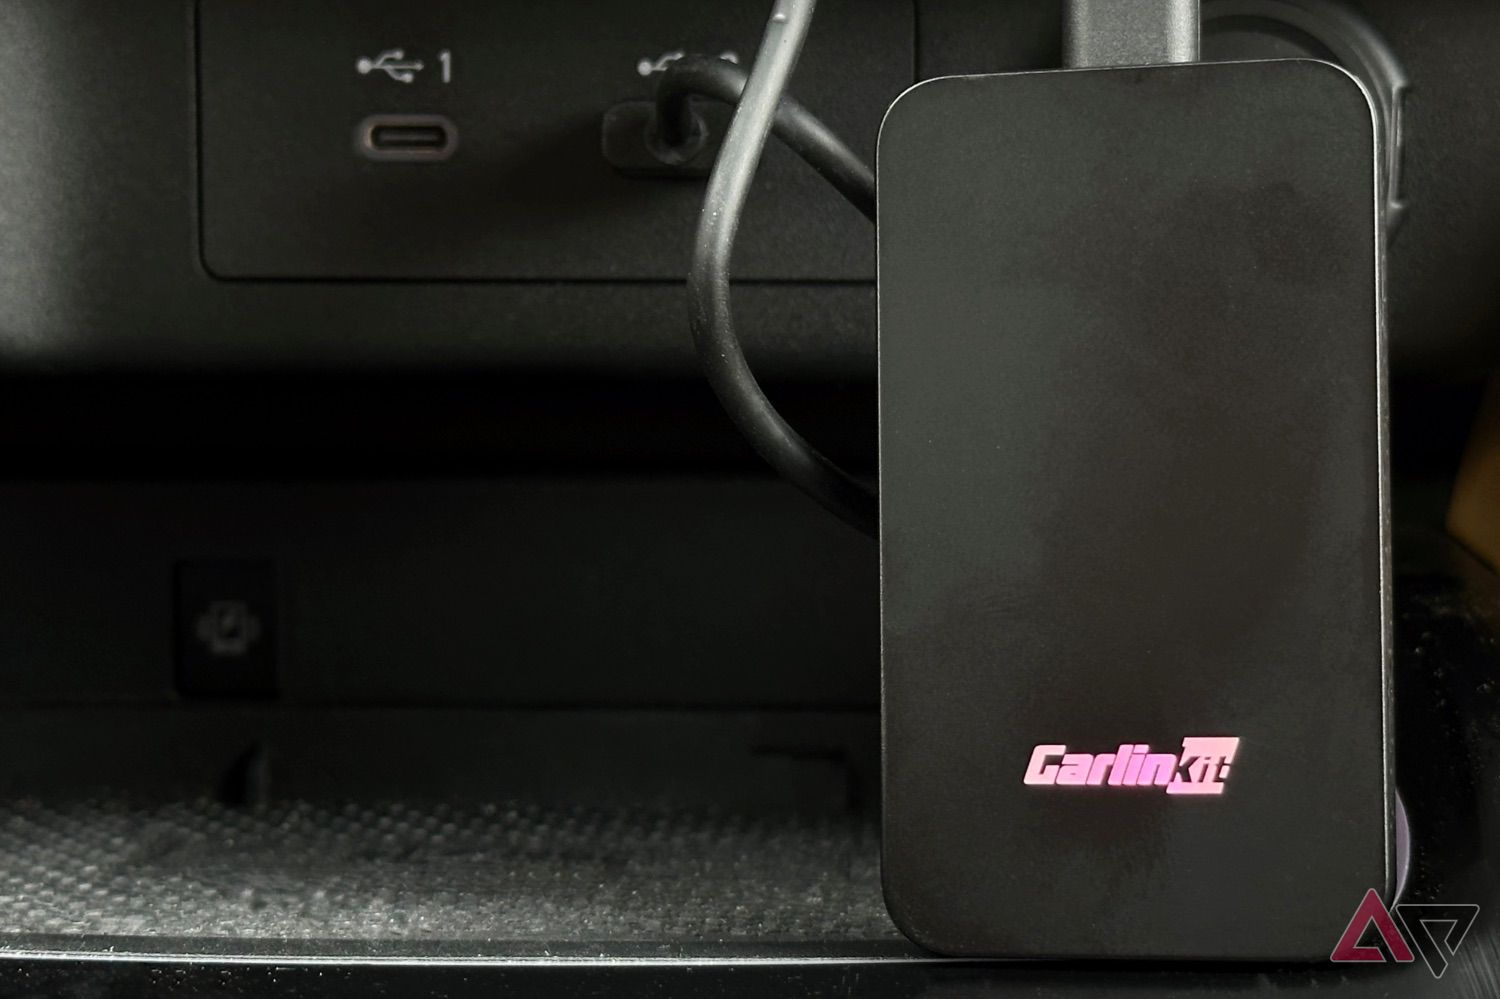 Carlinkit 5.0 review: Reliable wireless Android Auto with a catch